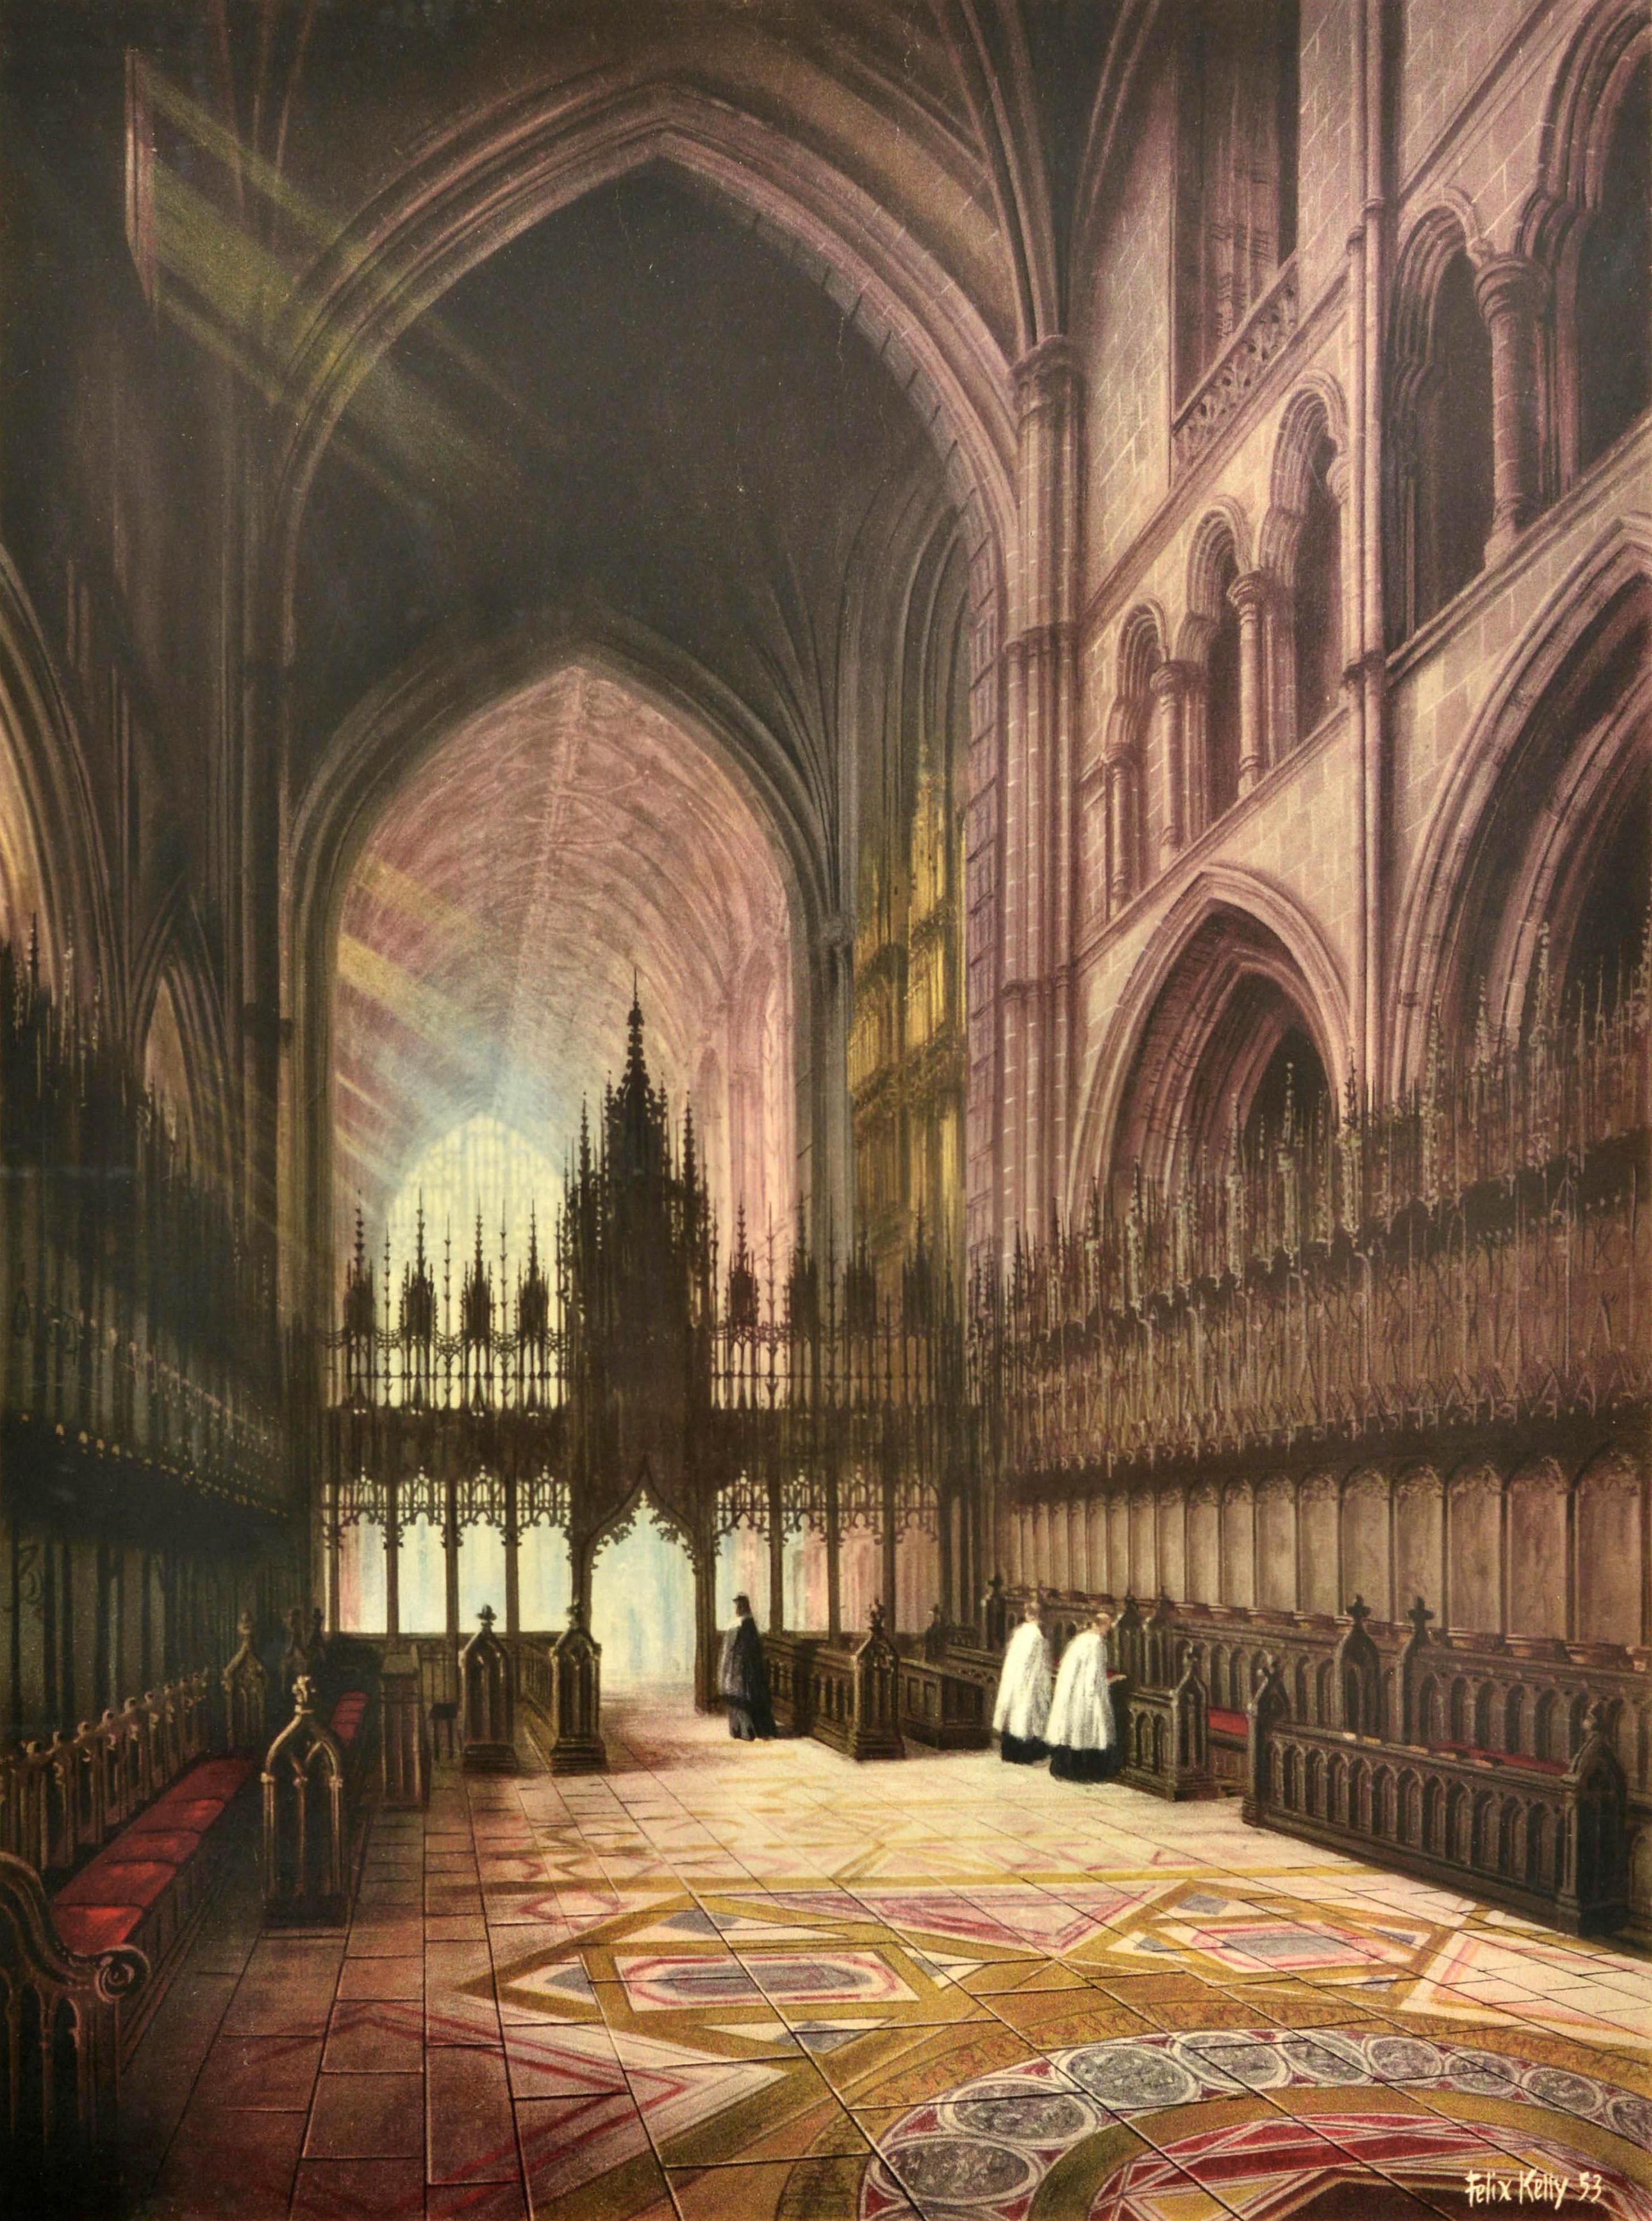 Original Vintage Travel Poster Chester British Railways Cathedral Cheshire Art - Print by Felix Kelly